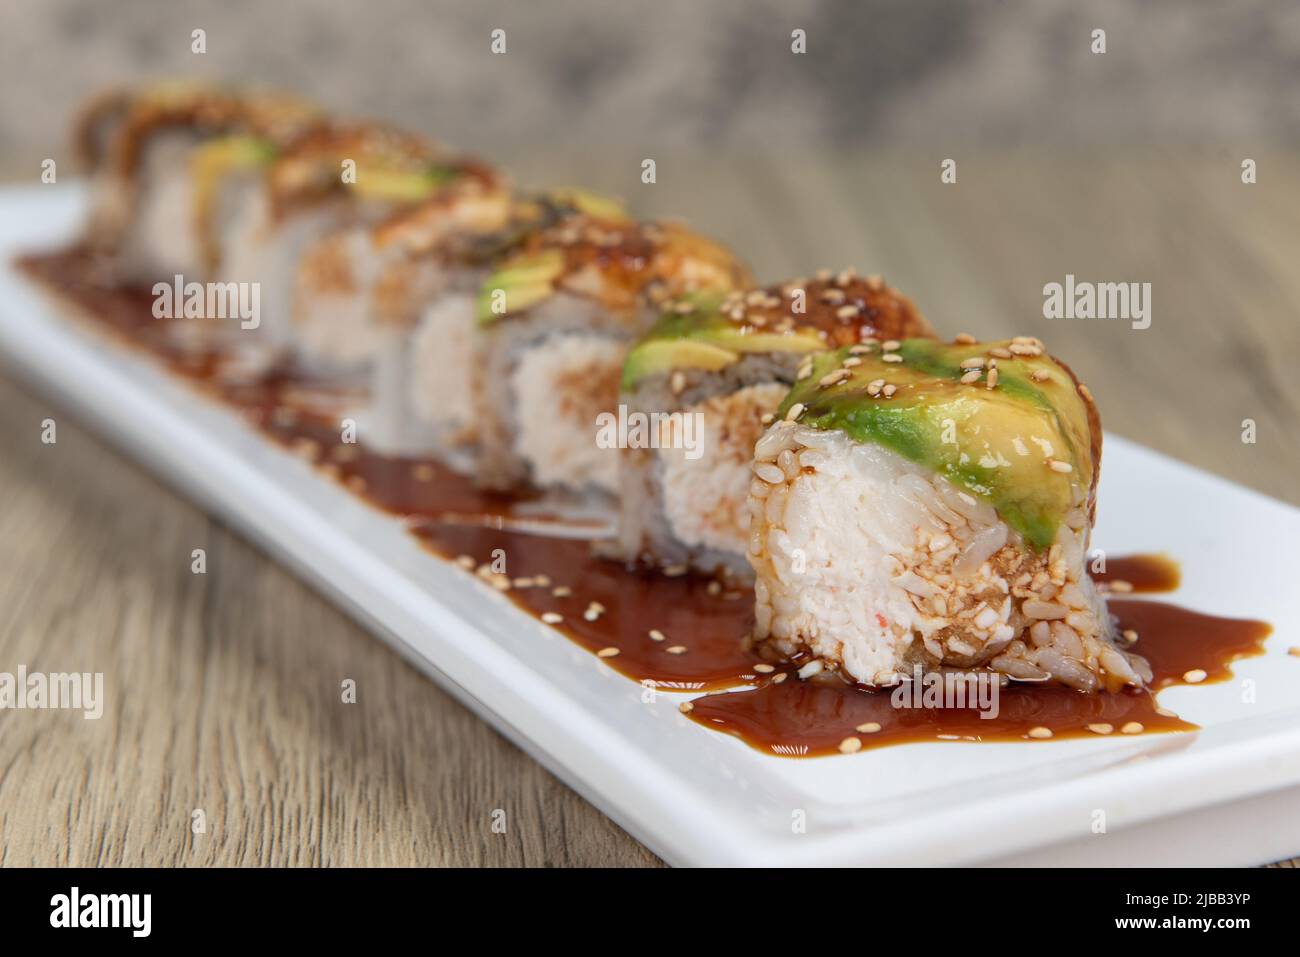 Asian cuisine sushi roll with crab mixed with shrimp tempura and topped with avocado and eel for a very hearty meal. Stock Photo